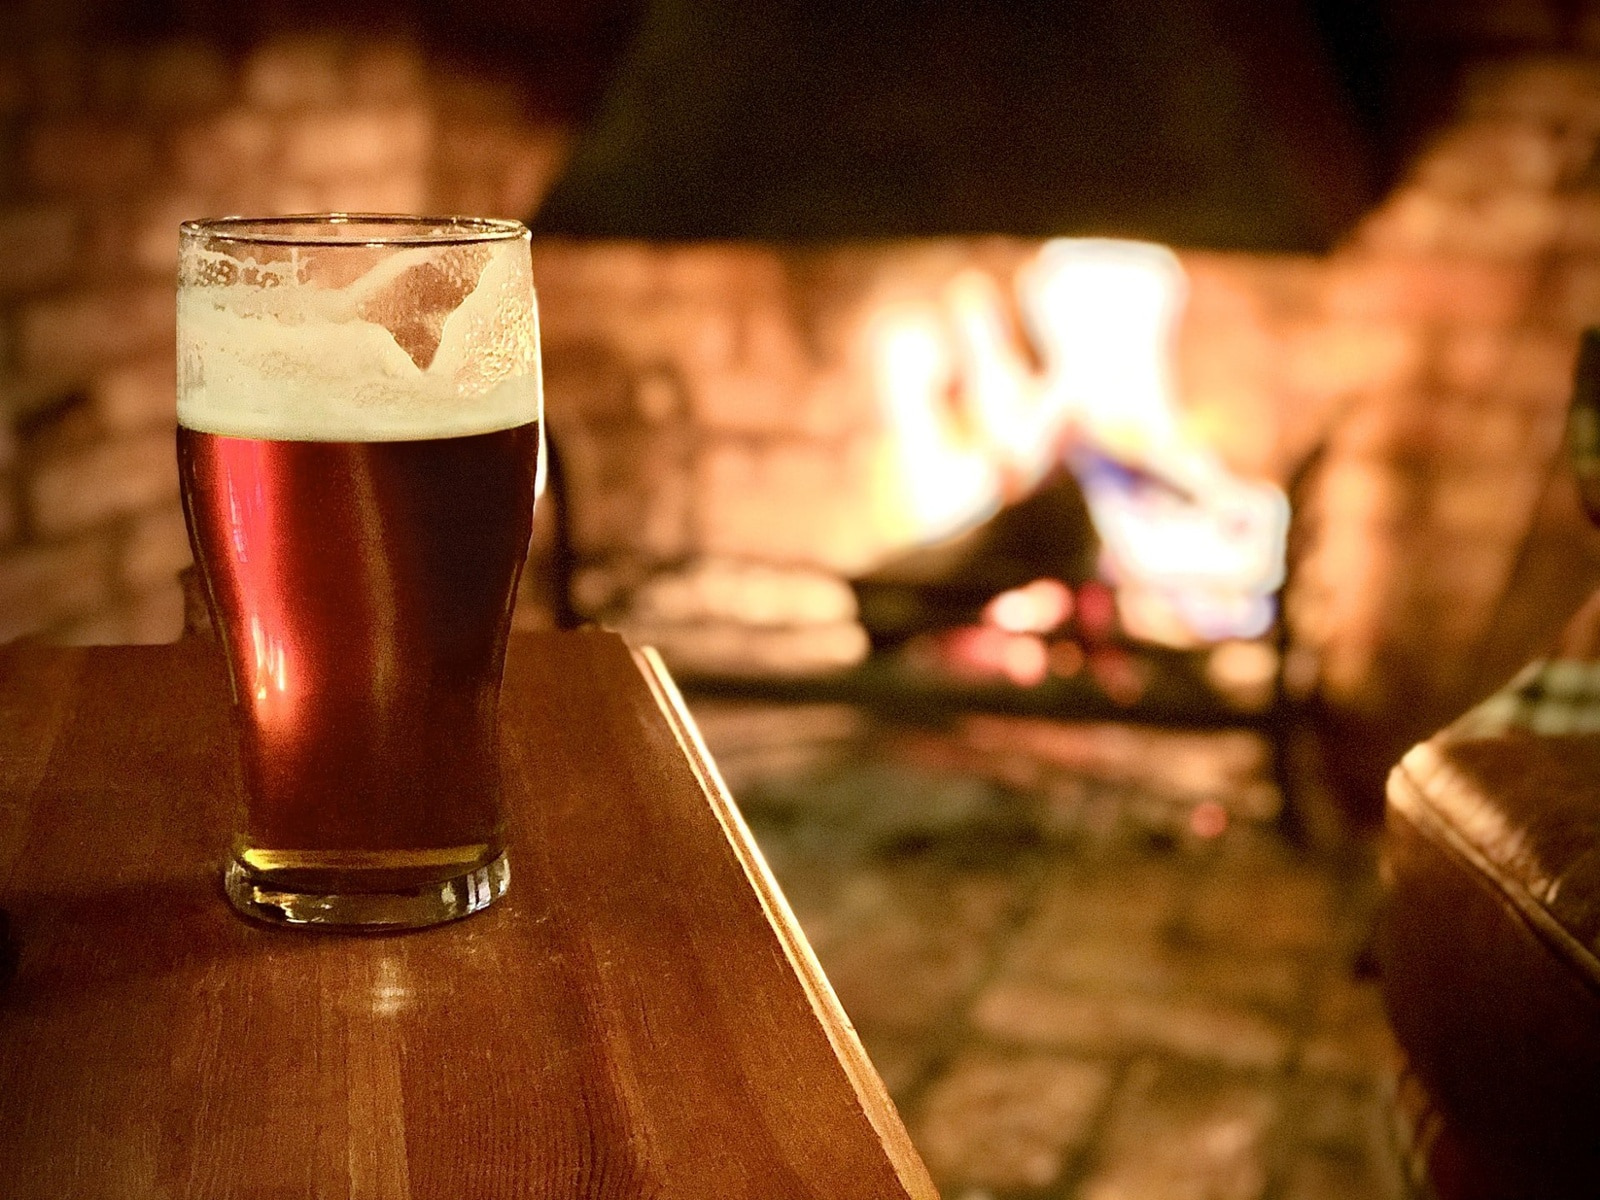 Beer by fireplace